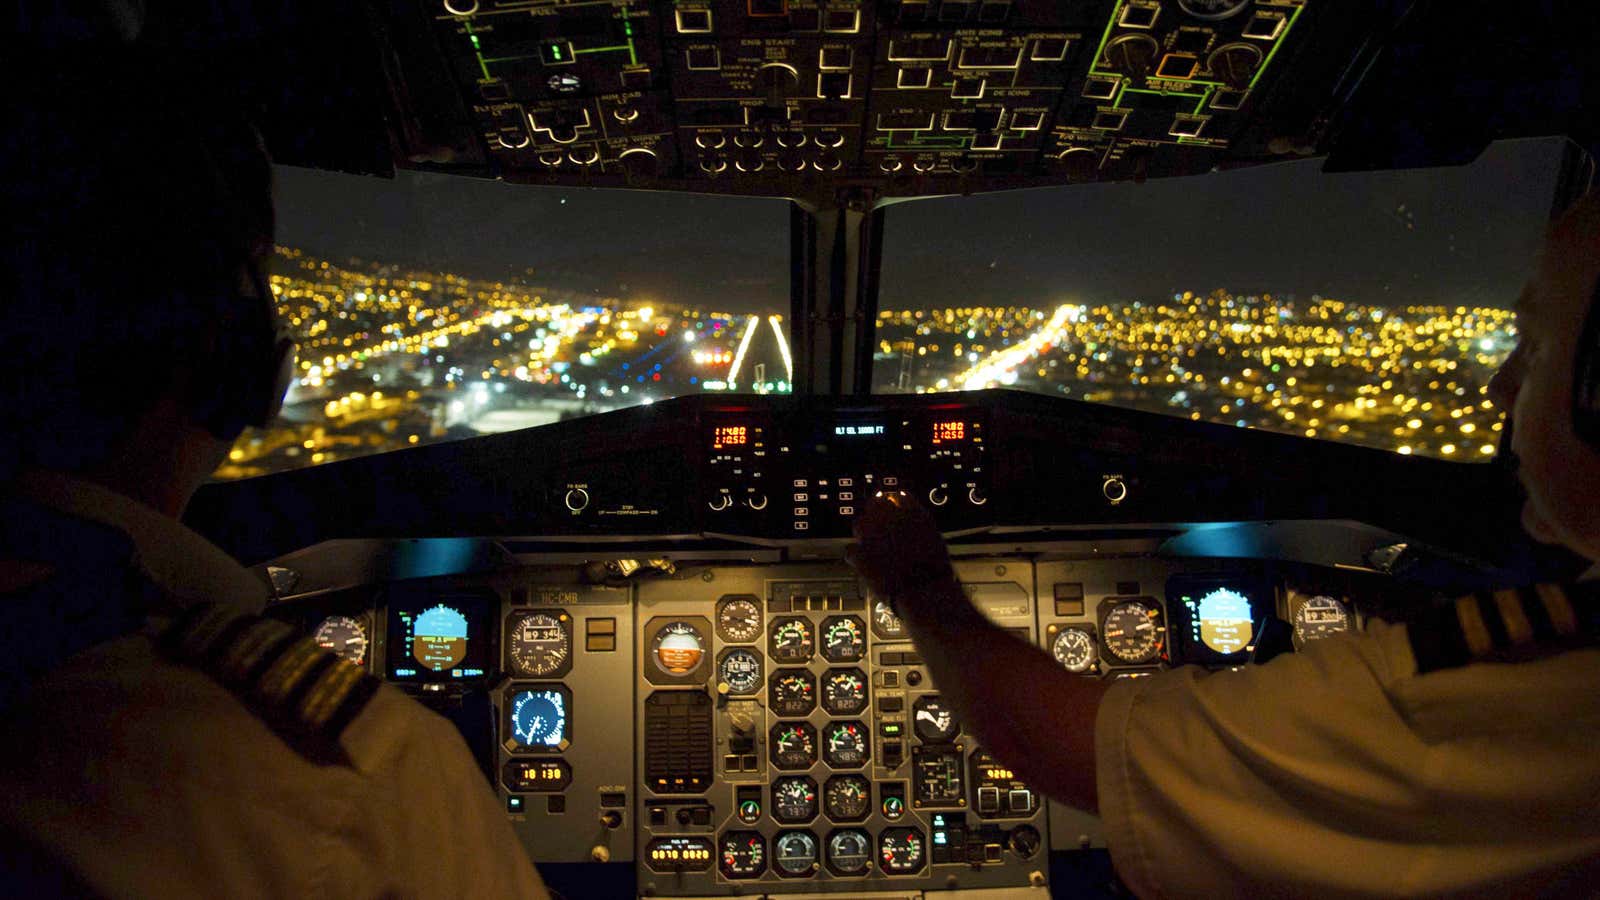 Bright lights can blind pilots and jeopardize otherwise routine landings.